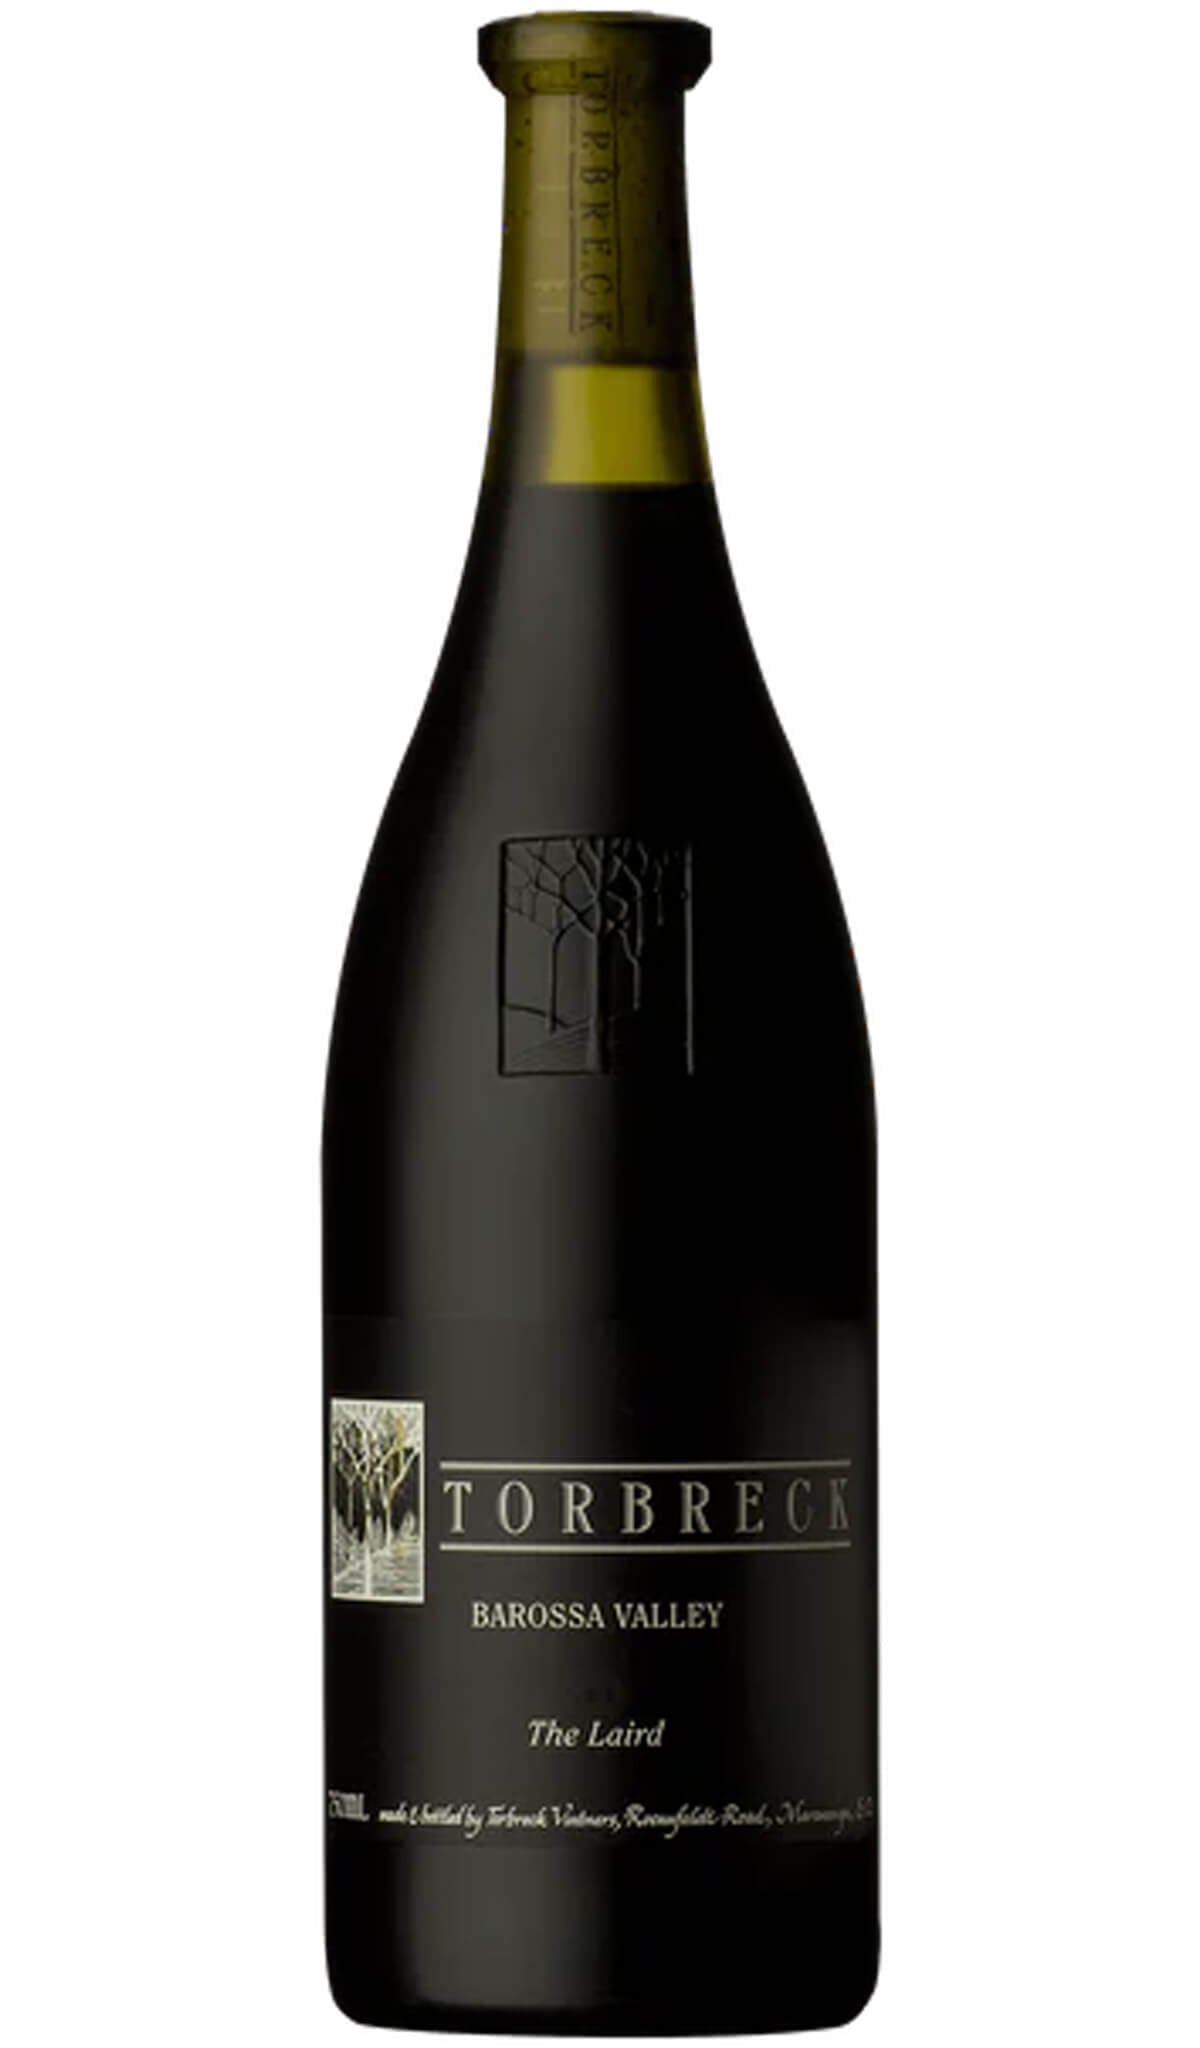 Find out more, explore the range and purchase Torbreck The Laird 2018 (Barossa Valley) available online at Wine Sellers Direct - Australia's independent liquor specialists.